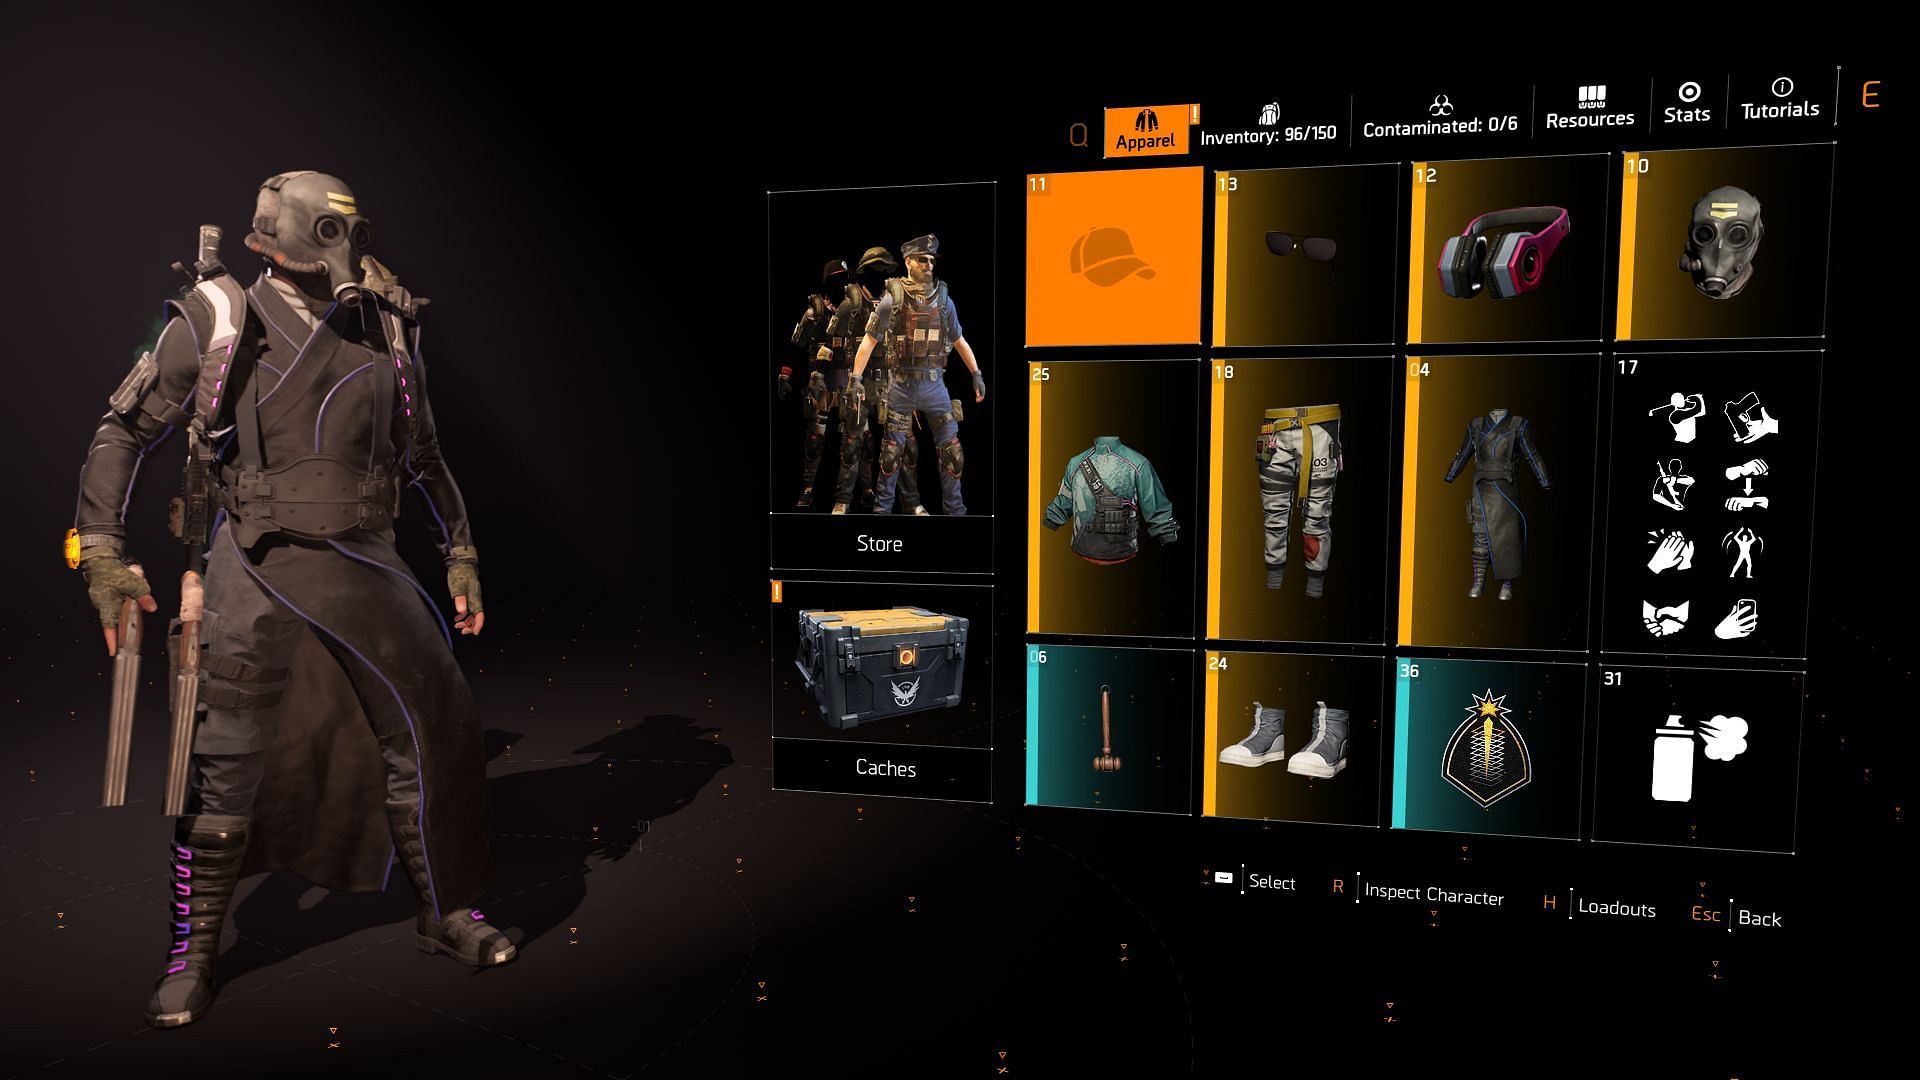 Apparel screen in The Division 2 (Image via Ubisoft)